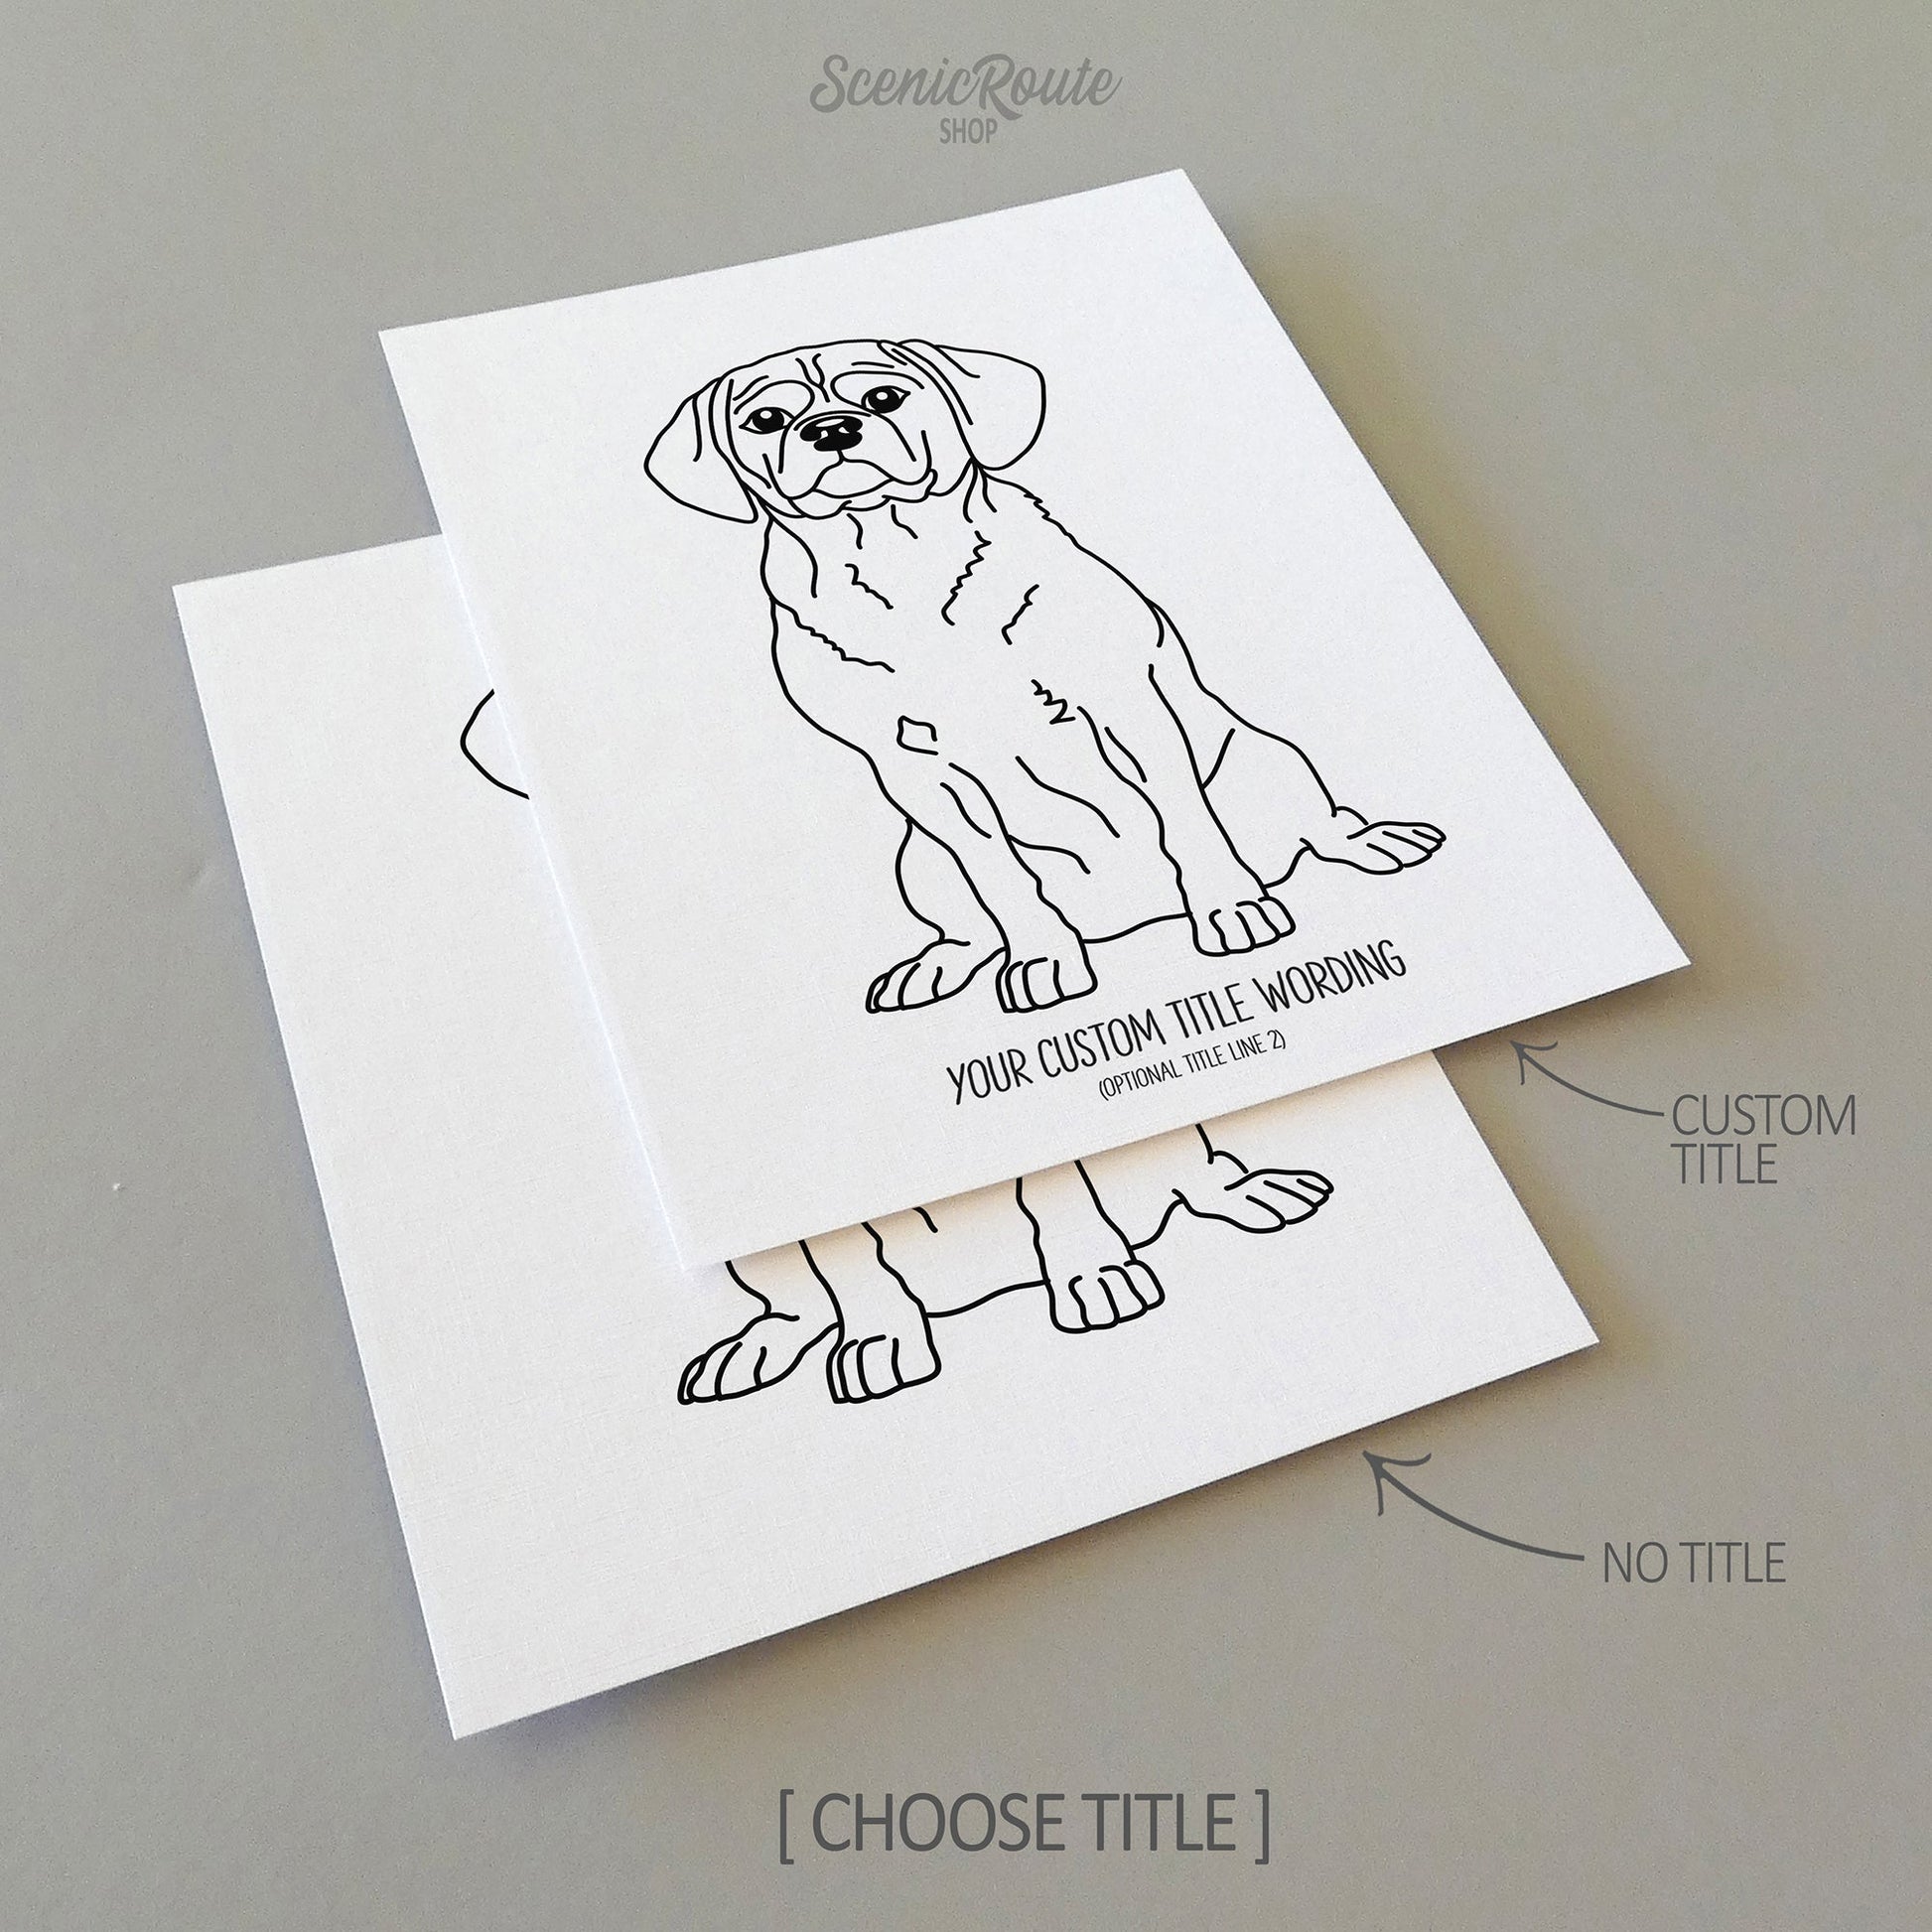 Two line art drawings of a Puggle dog on white linen paper with a gray background.  The pieces are shown with “No Title” and “Custom Title” options for the available art print options.